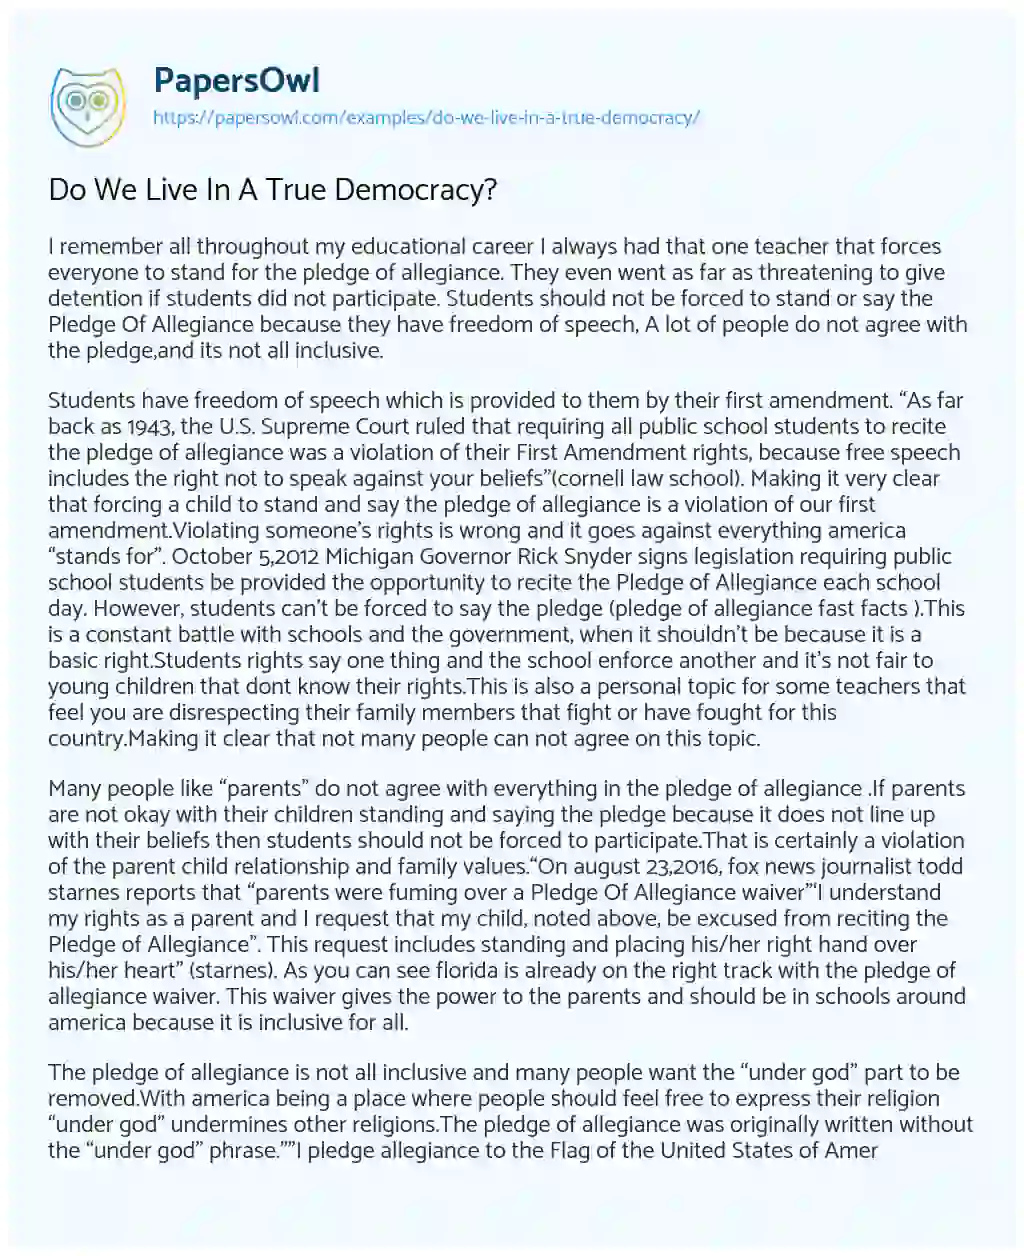 Essay on Do we Live in a True Democracy?